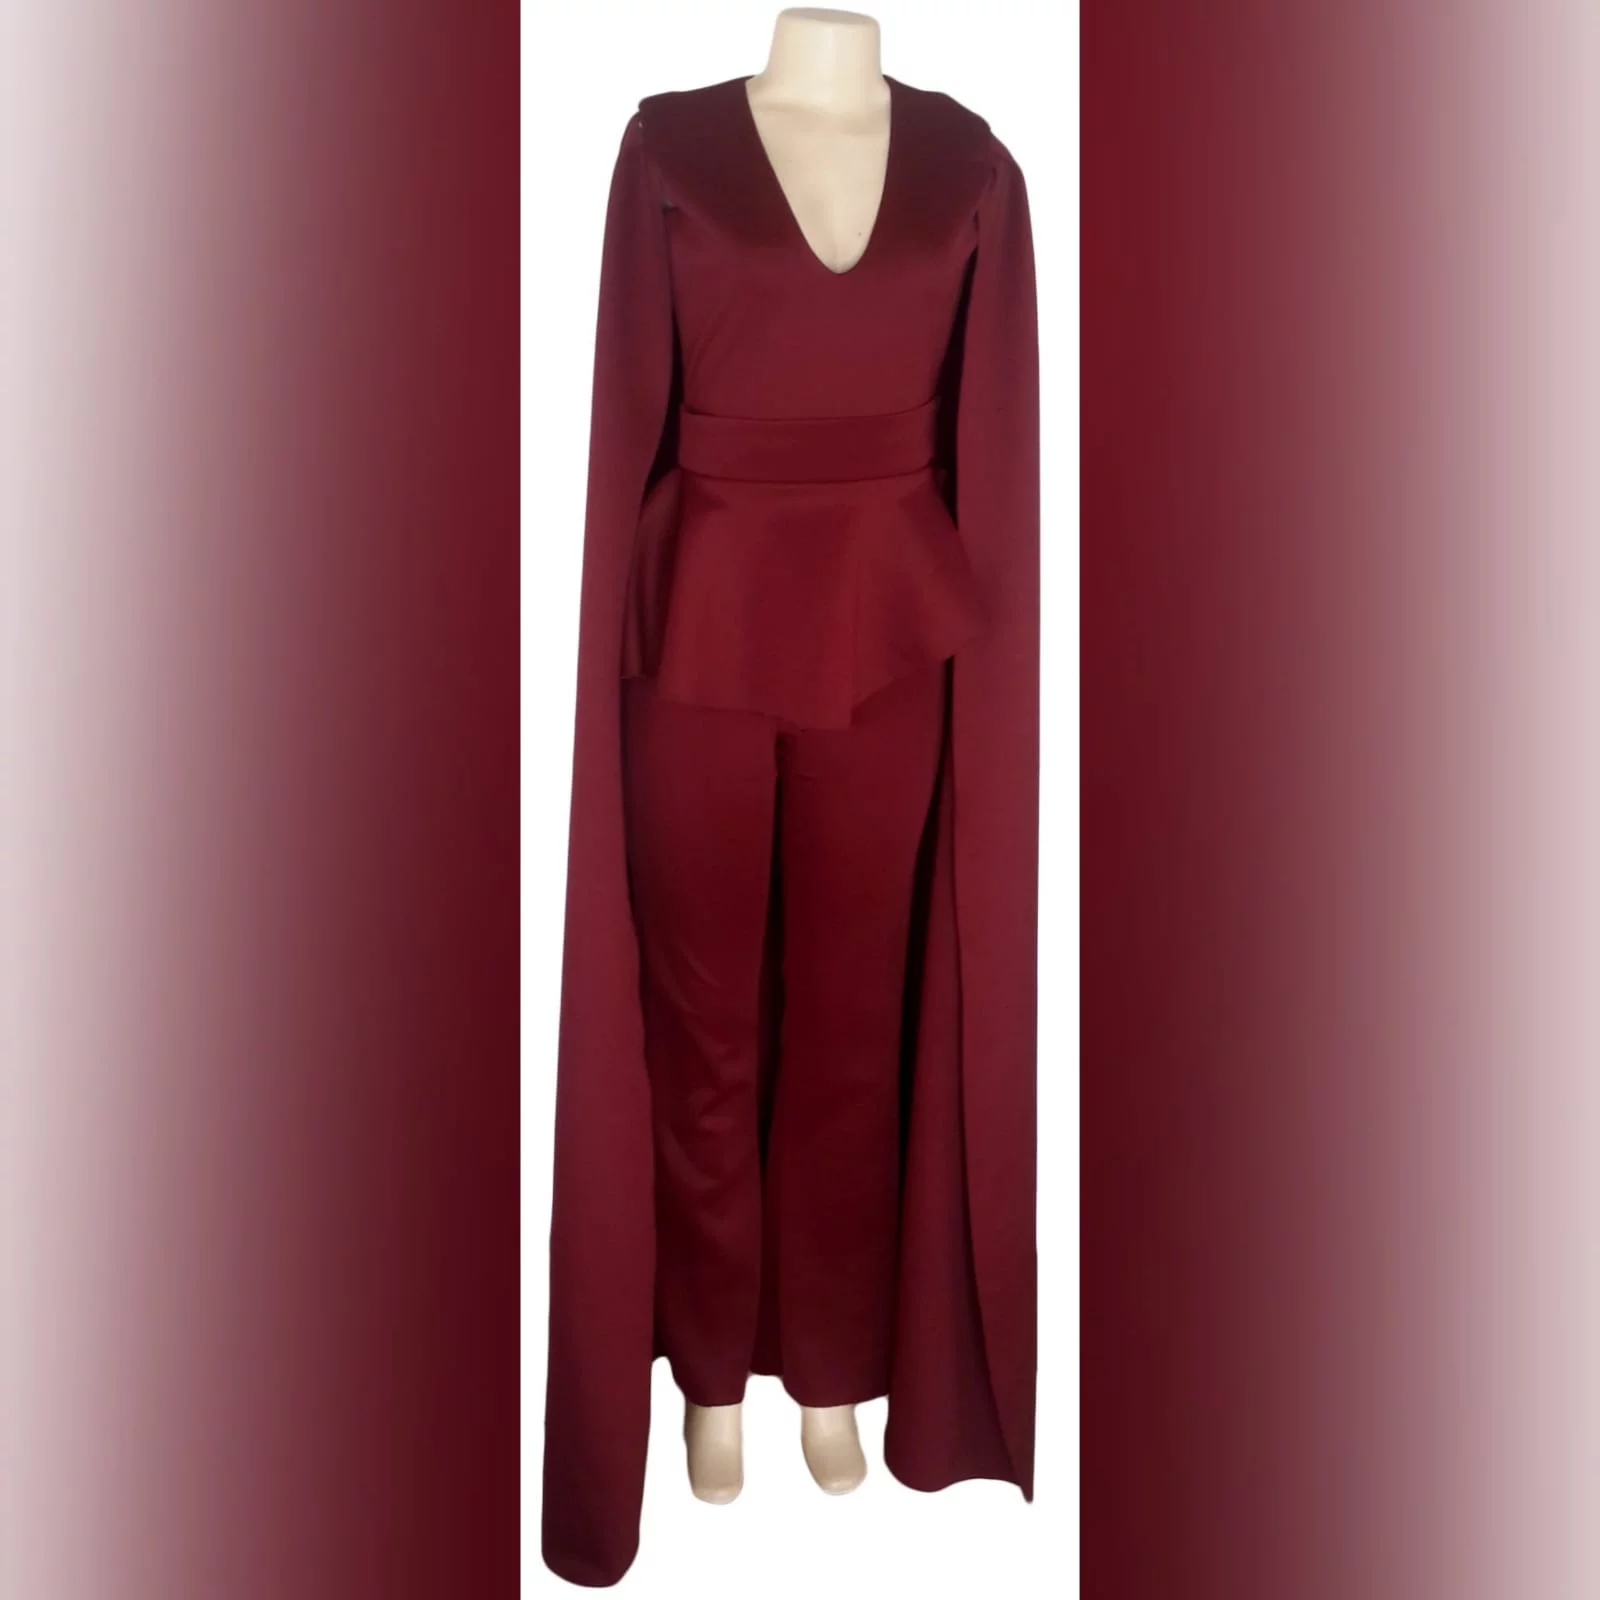 3 piece burgundy evening outfit 2 3 piece burgundy evening outfit. Bodysuit with a v neckline, with a removable peplum belt. With a removable shoulder cape